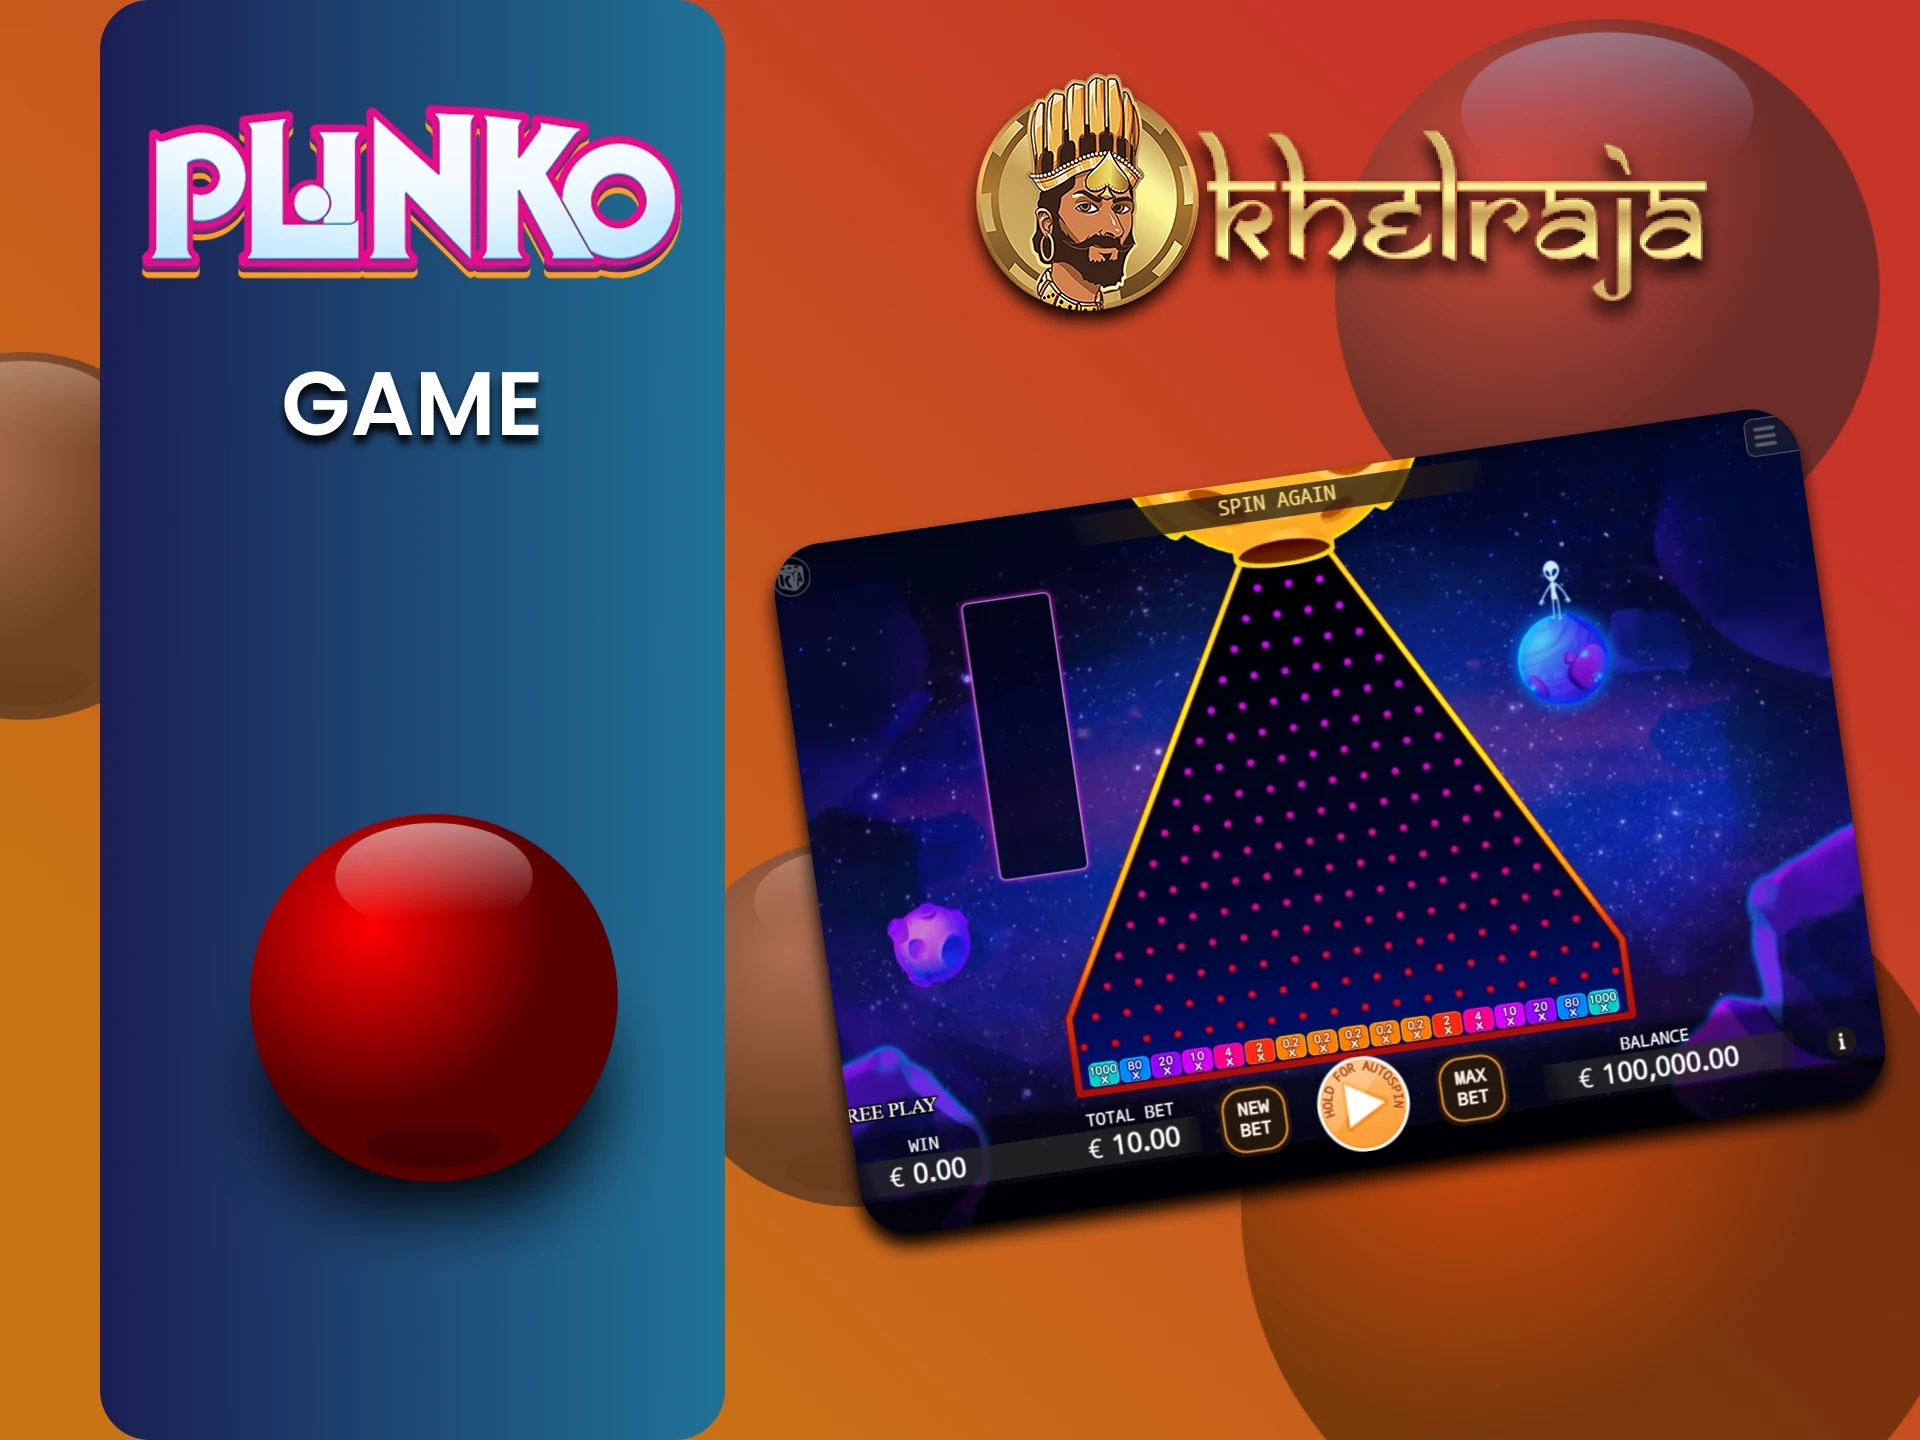 Learn about the game Plinko on the Khelraja website.